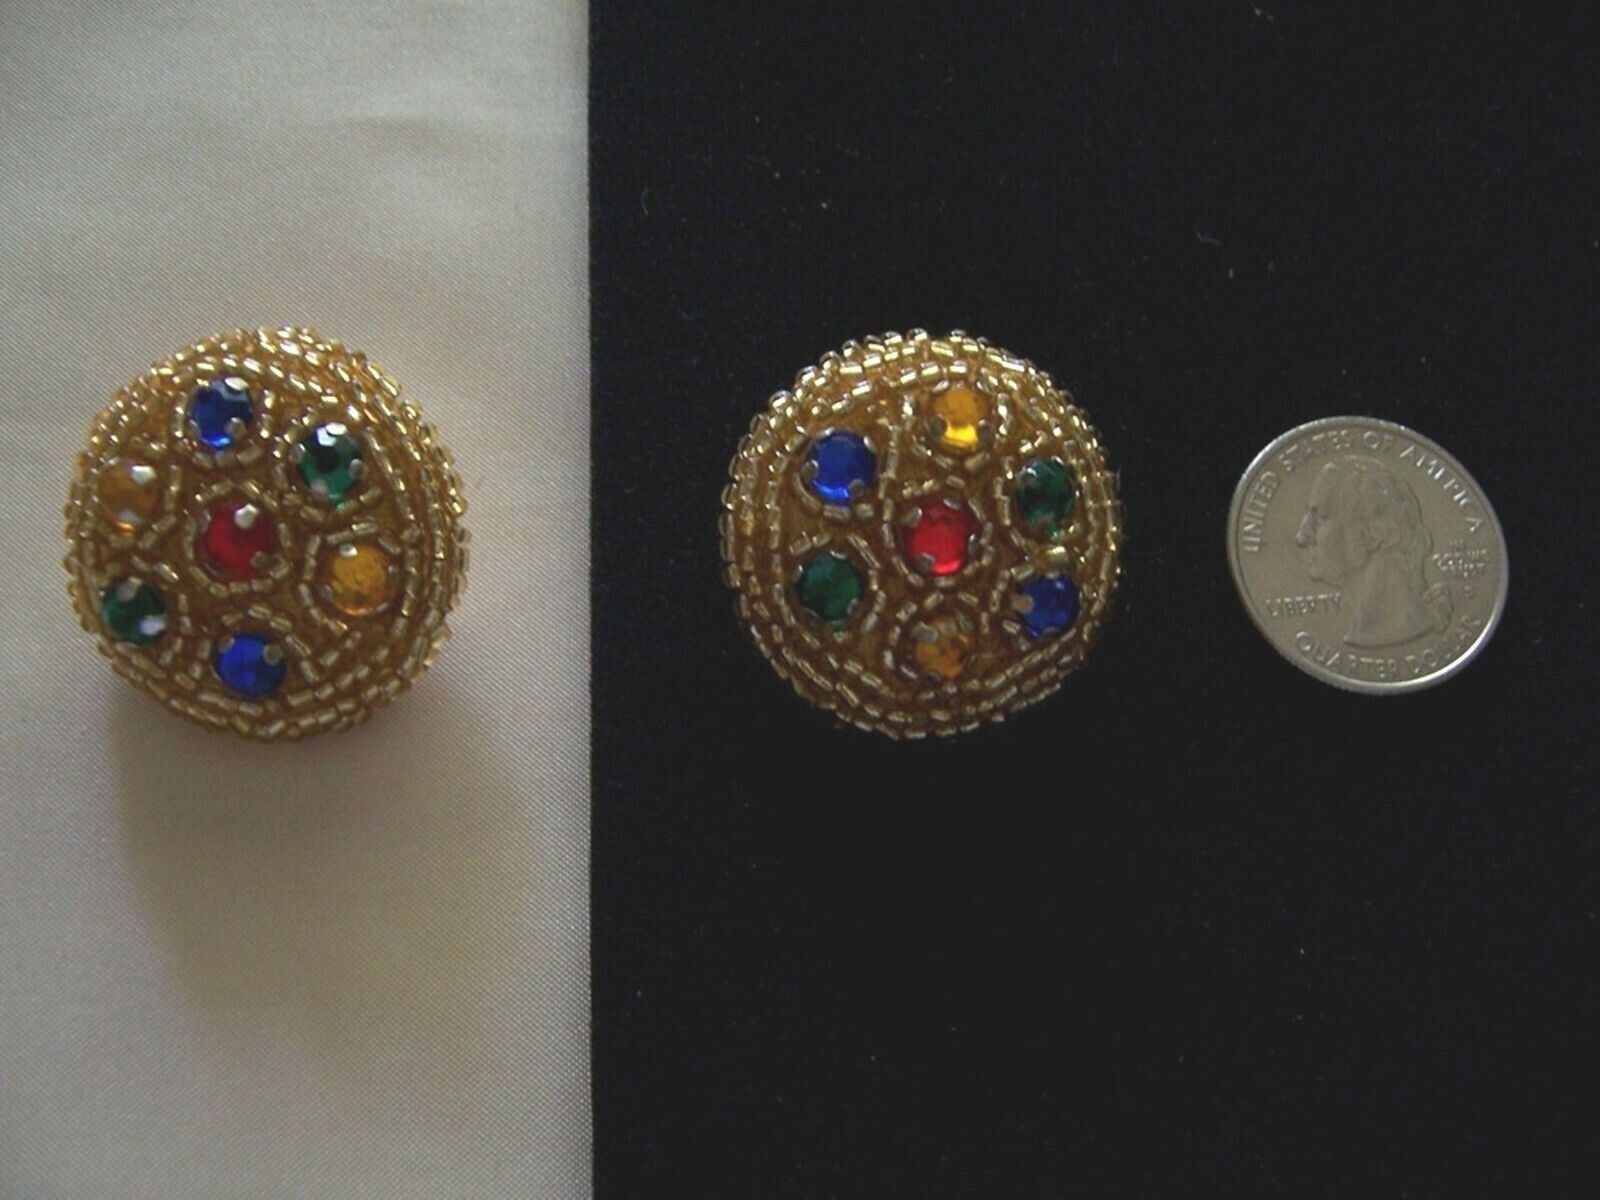 2 HAND BEADED GOLD BEAD MULTI GEMS BUTTONS 1.25″ IN SIZE